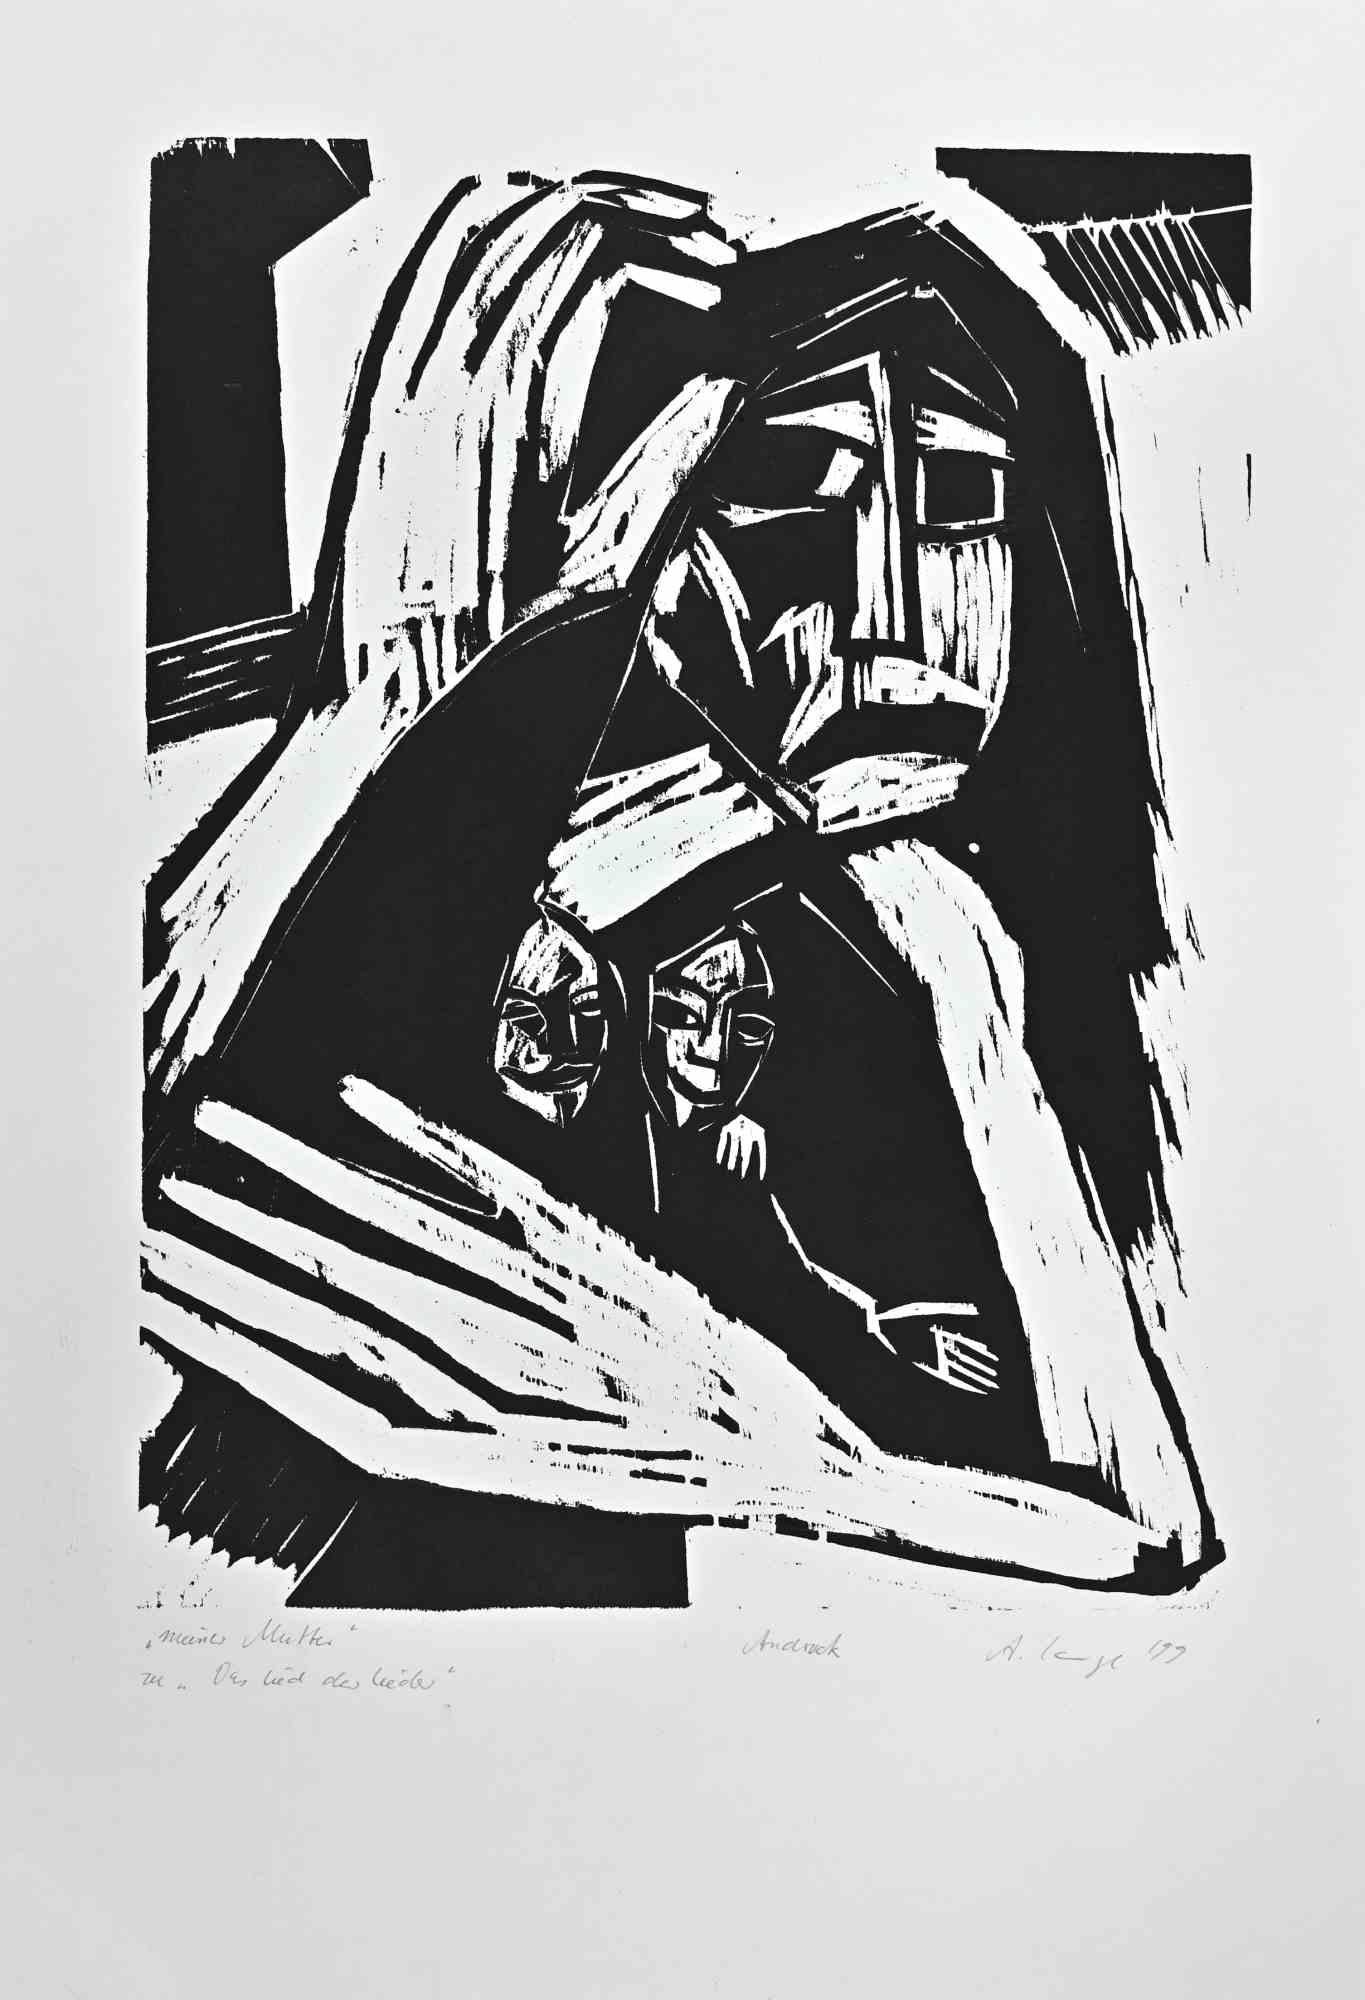  Meine Mutter is a woodcut print on ivory-colored paper realized in 1999 by Andrea Lange.

Hand-signed on the lower right and dated.

Titled"Andruck" on the lower center.

Good conditions.

The artwork through expressionistic characteristics is